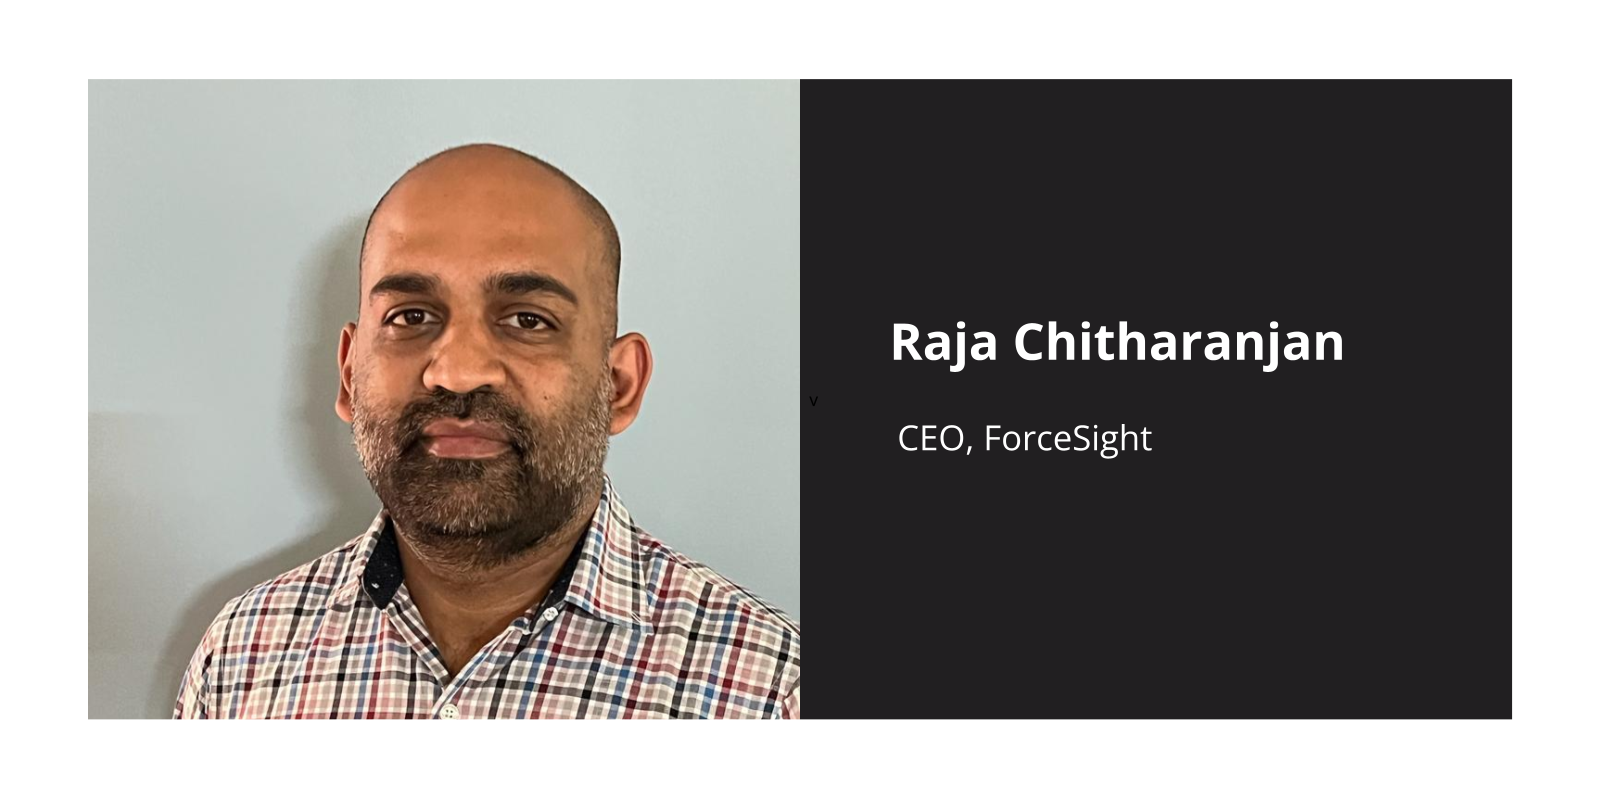 [Startup Bharat] ForceSight’s ecommerce enablement software helps SMBs grow online sales 